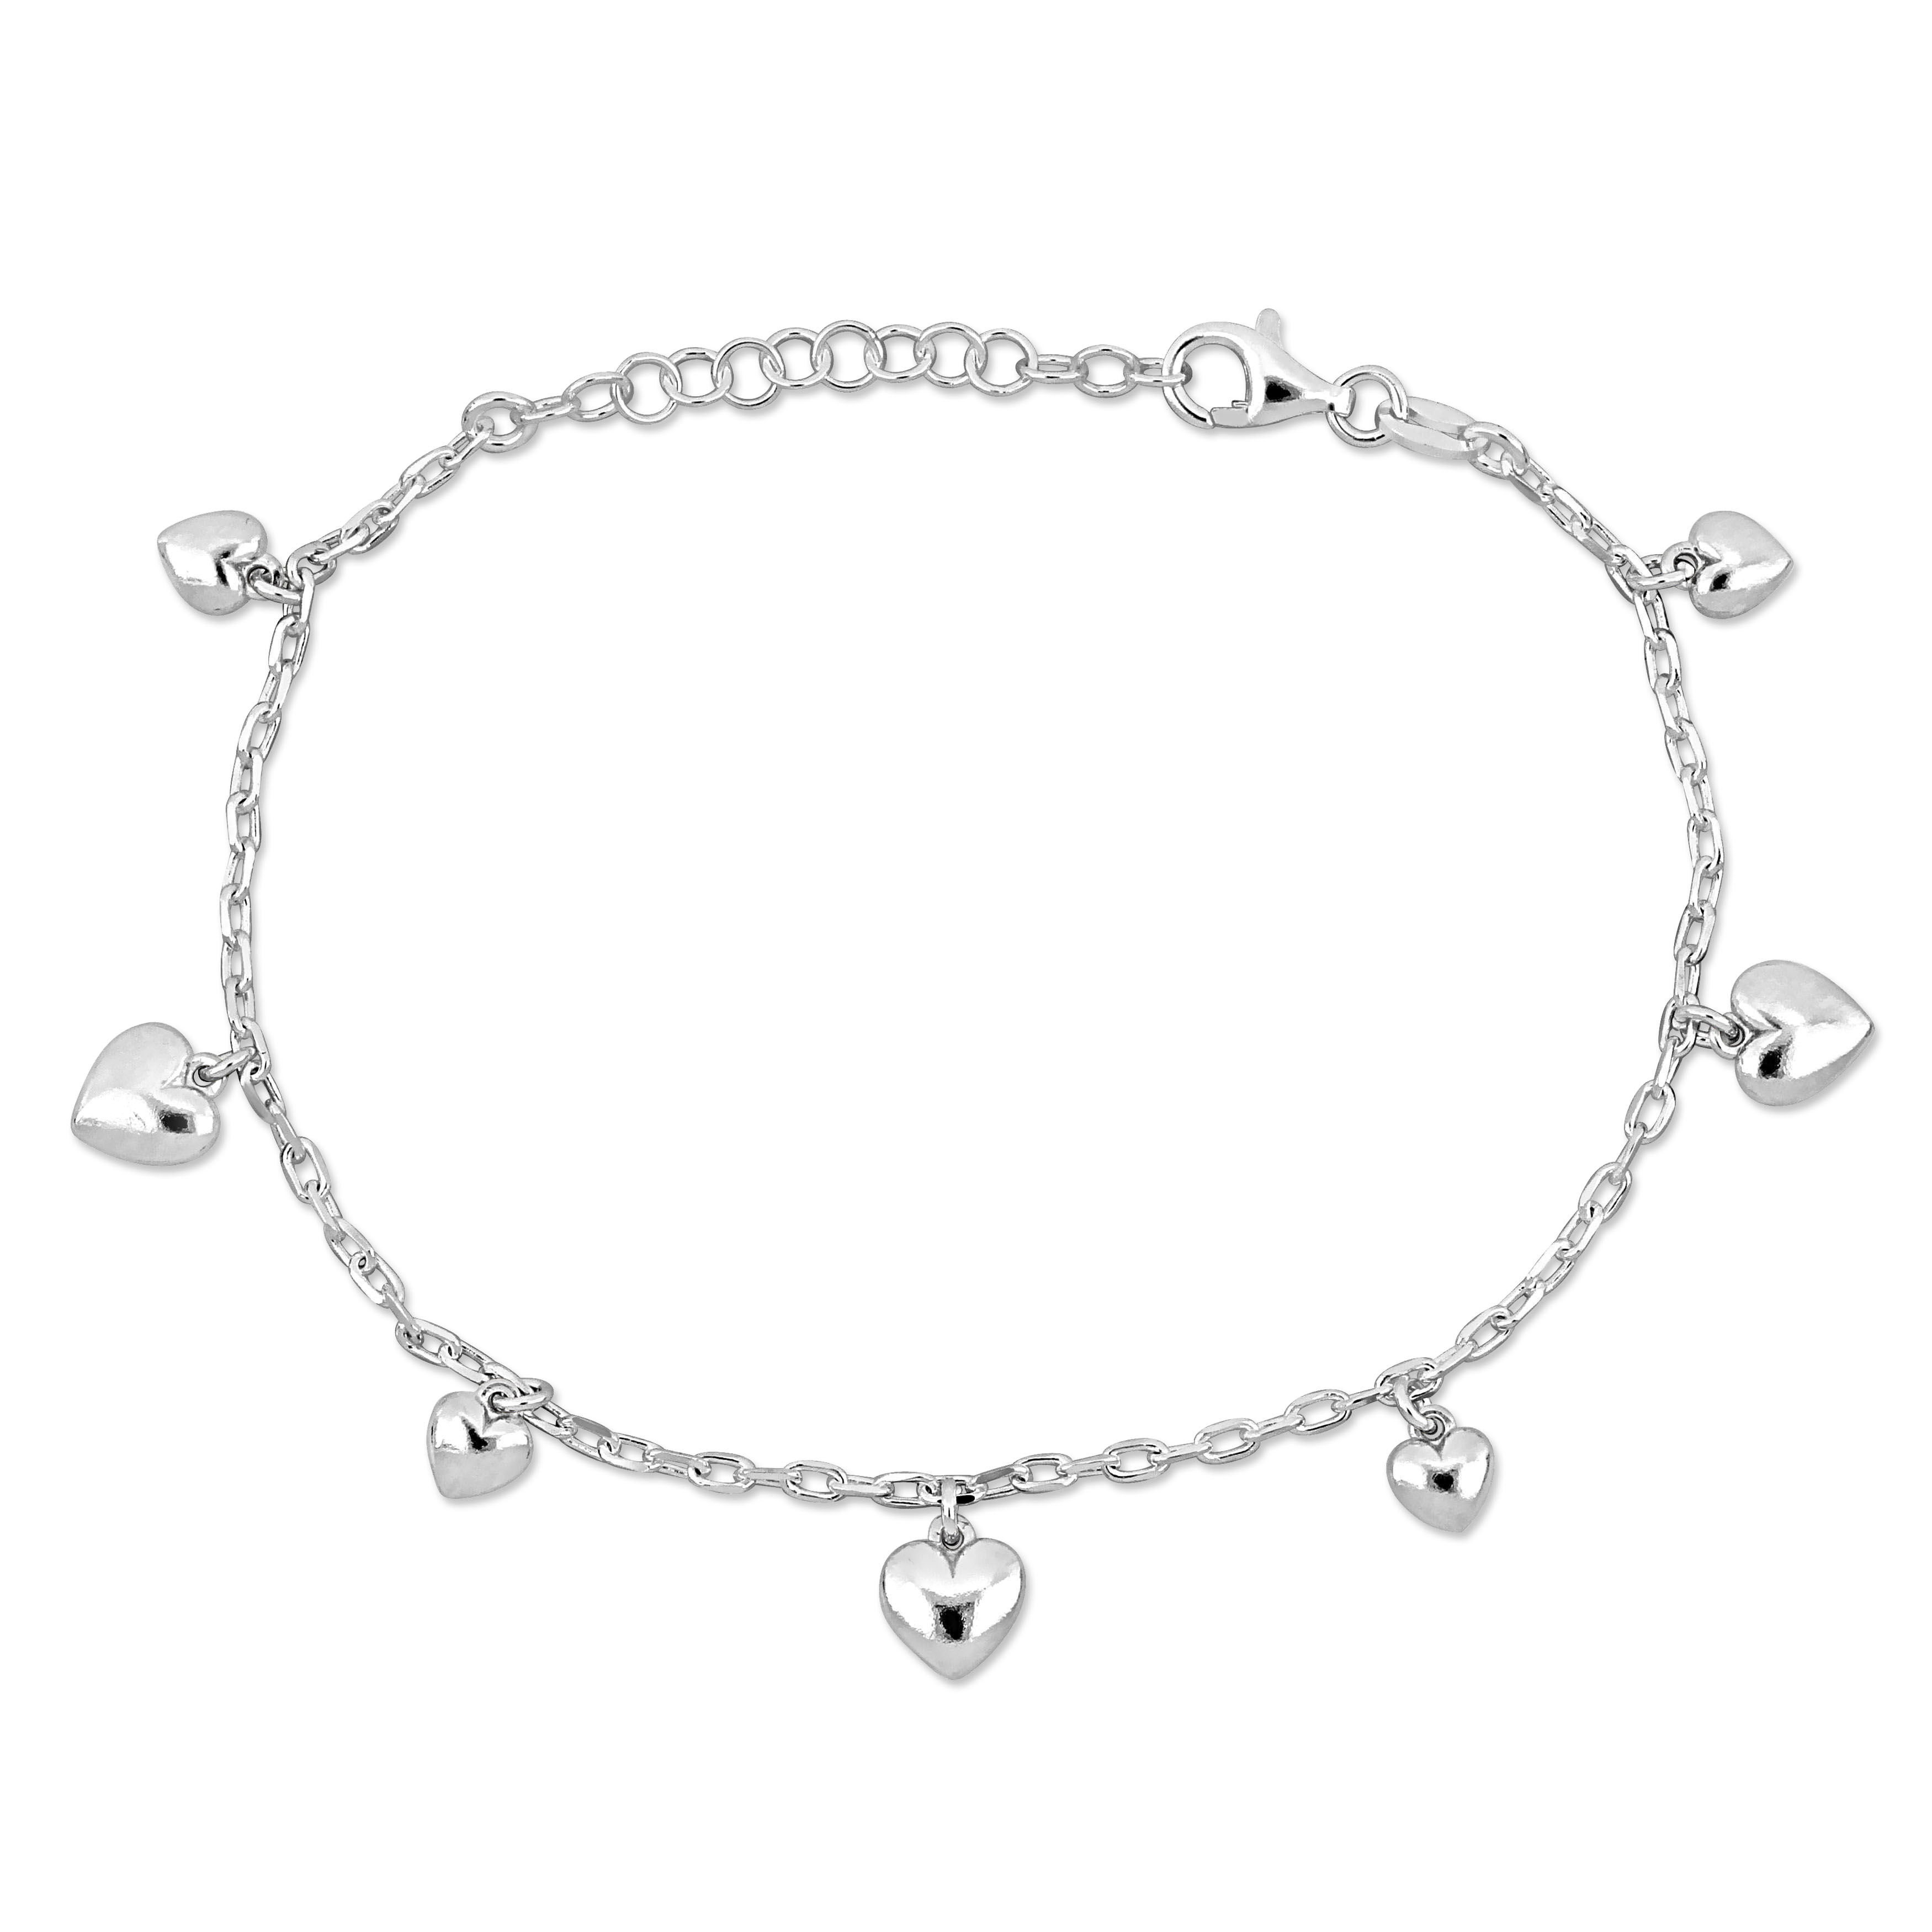 Heart Charm Bracelet on Diamond Cut Cable Chain in Sterling Silver - 6.5+1 in.